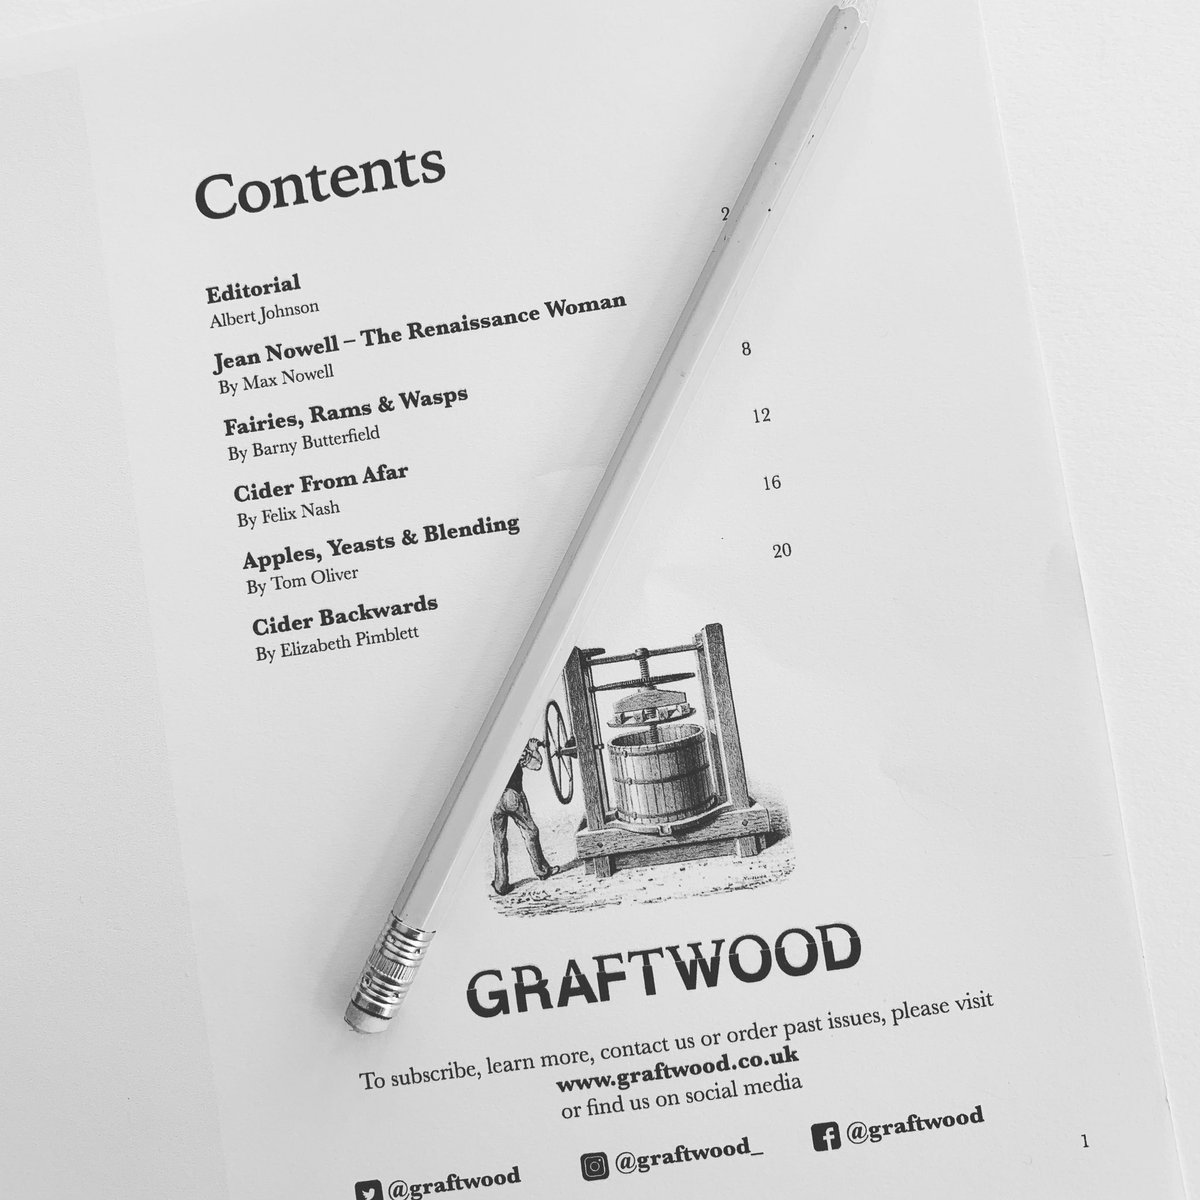 If you’ve subscribed to Graftwood here’s a glimpse of what to expect in issue 1

5 beautiful pieces, from 5 beautiful authors, each exploring the deeper meaning of cider & how it shapes our worlds.

Subscribe at graftwood.co.uk 
#ReThinkCider